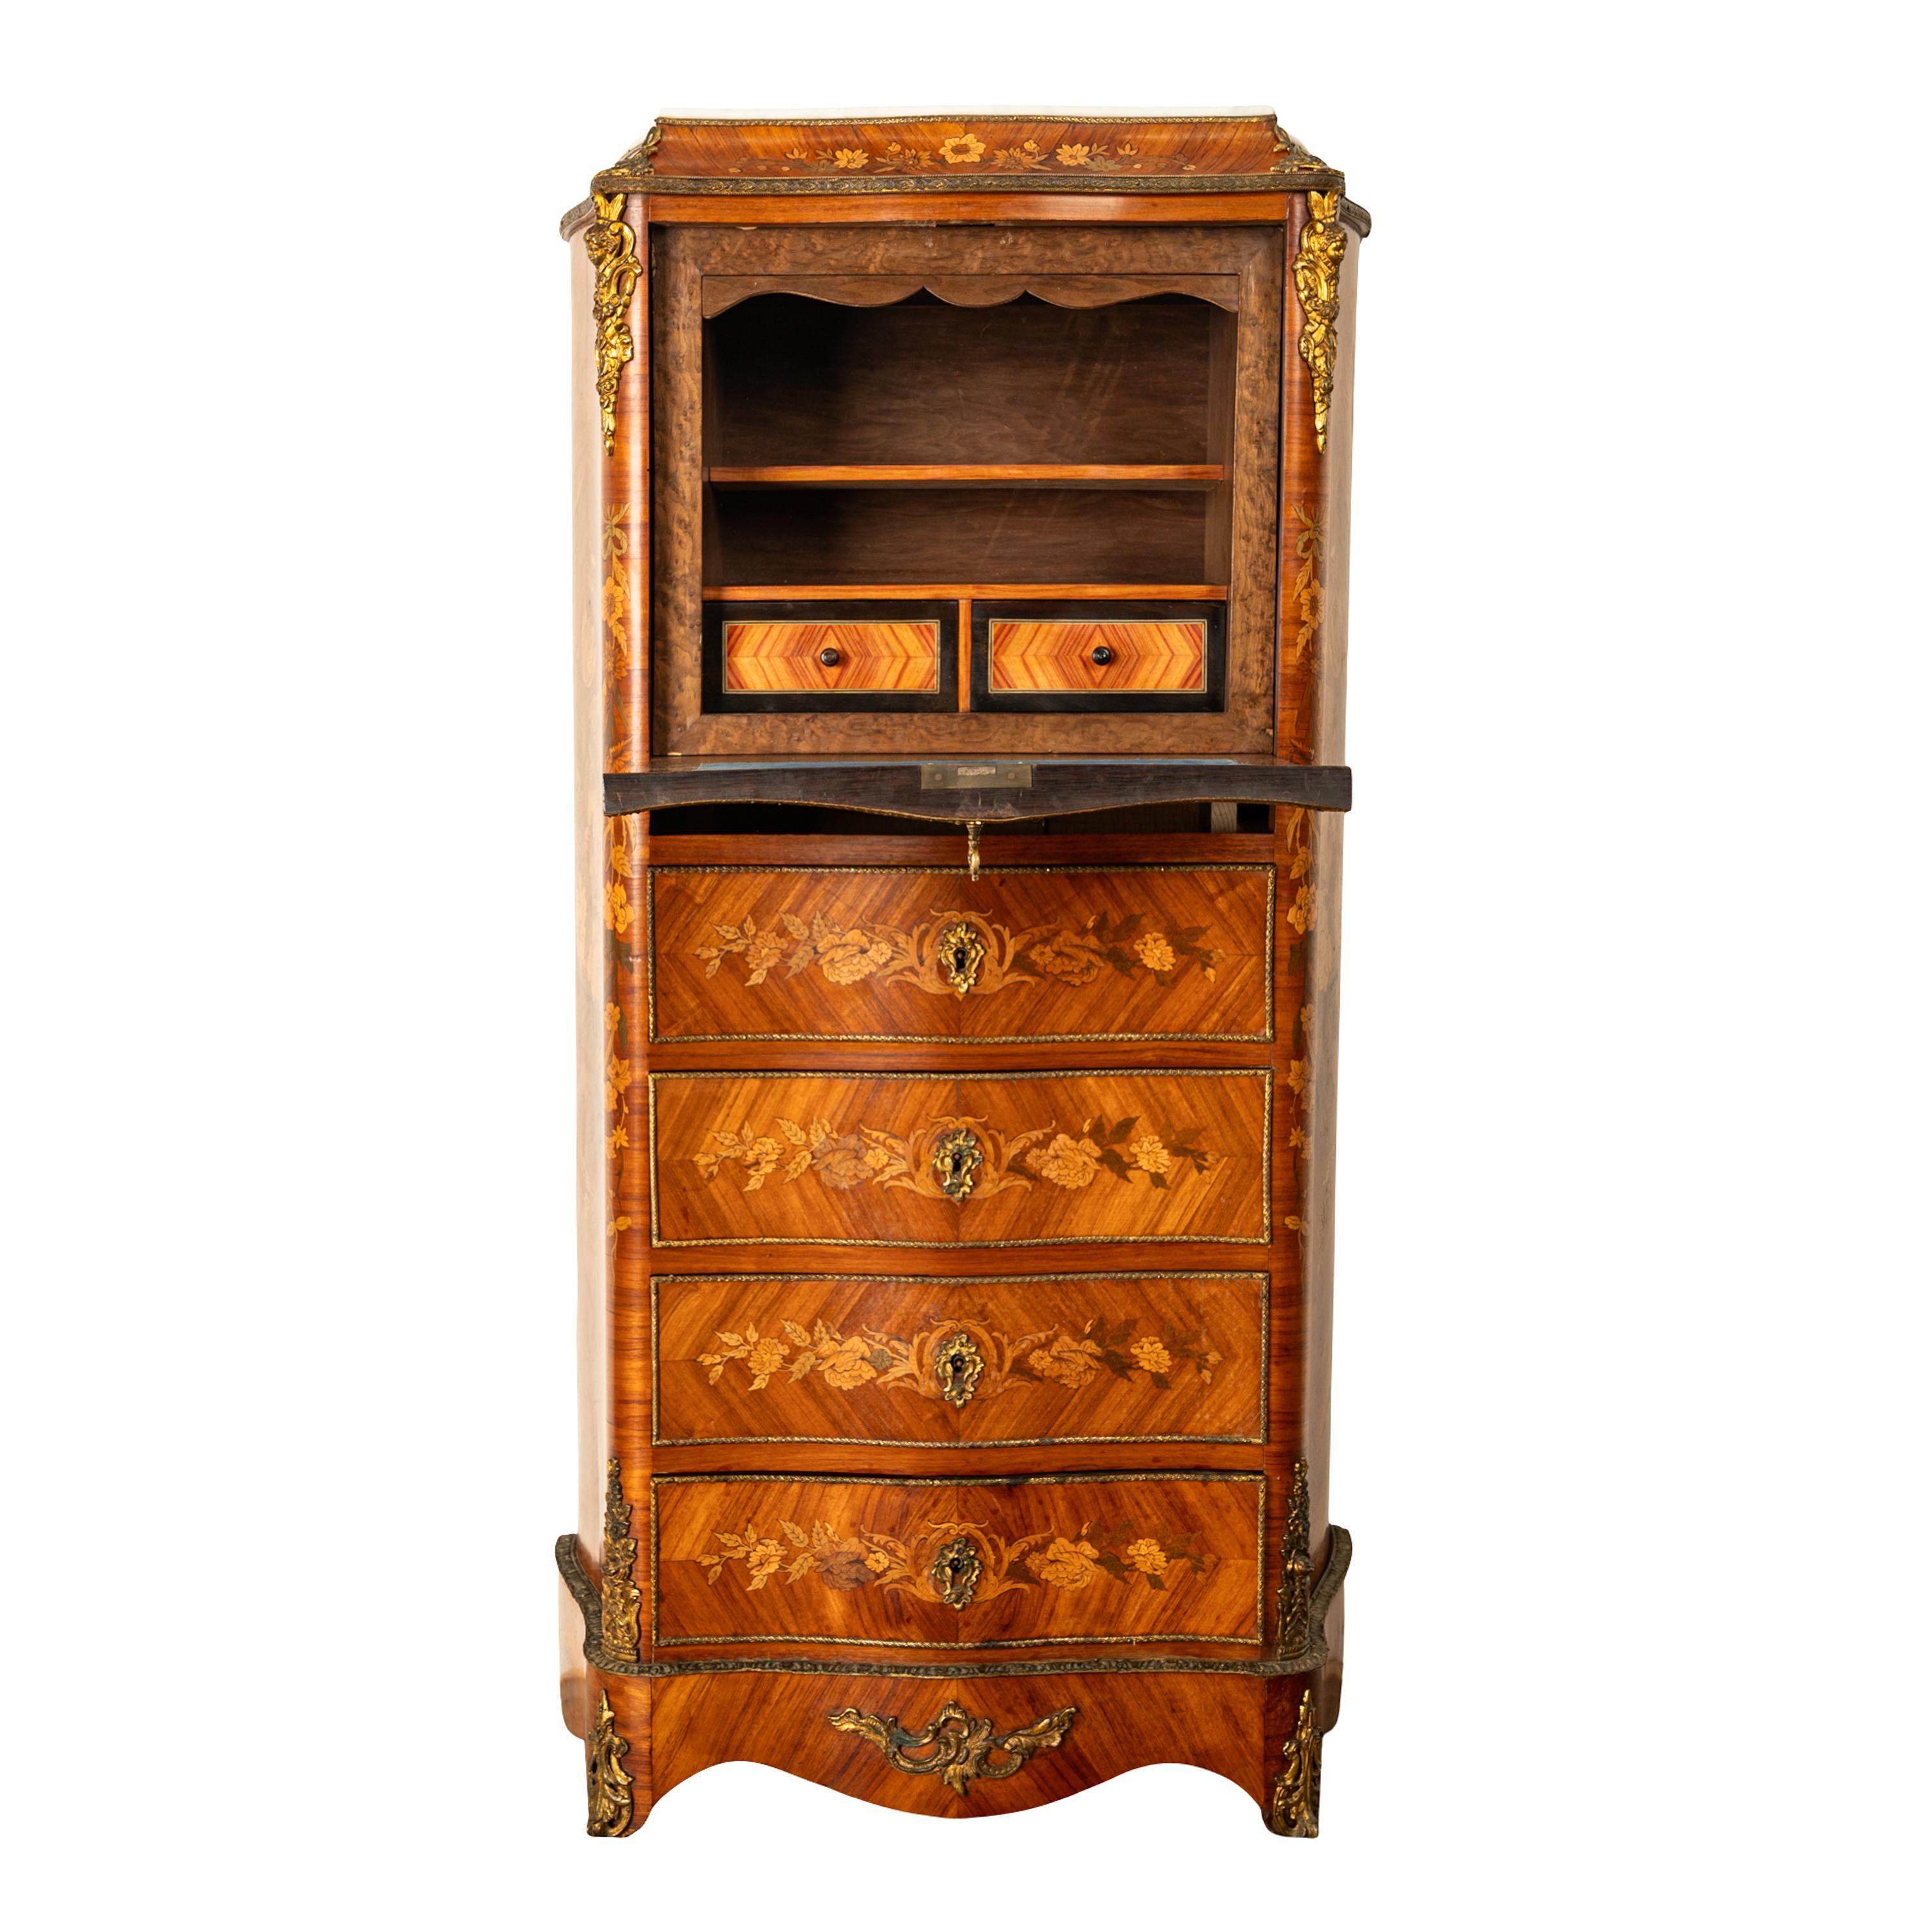 Fine Antique French Louis XV Marquetry Rosewood Ormolu Secretaire Abattant 1880 For Sale 4